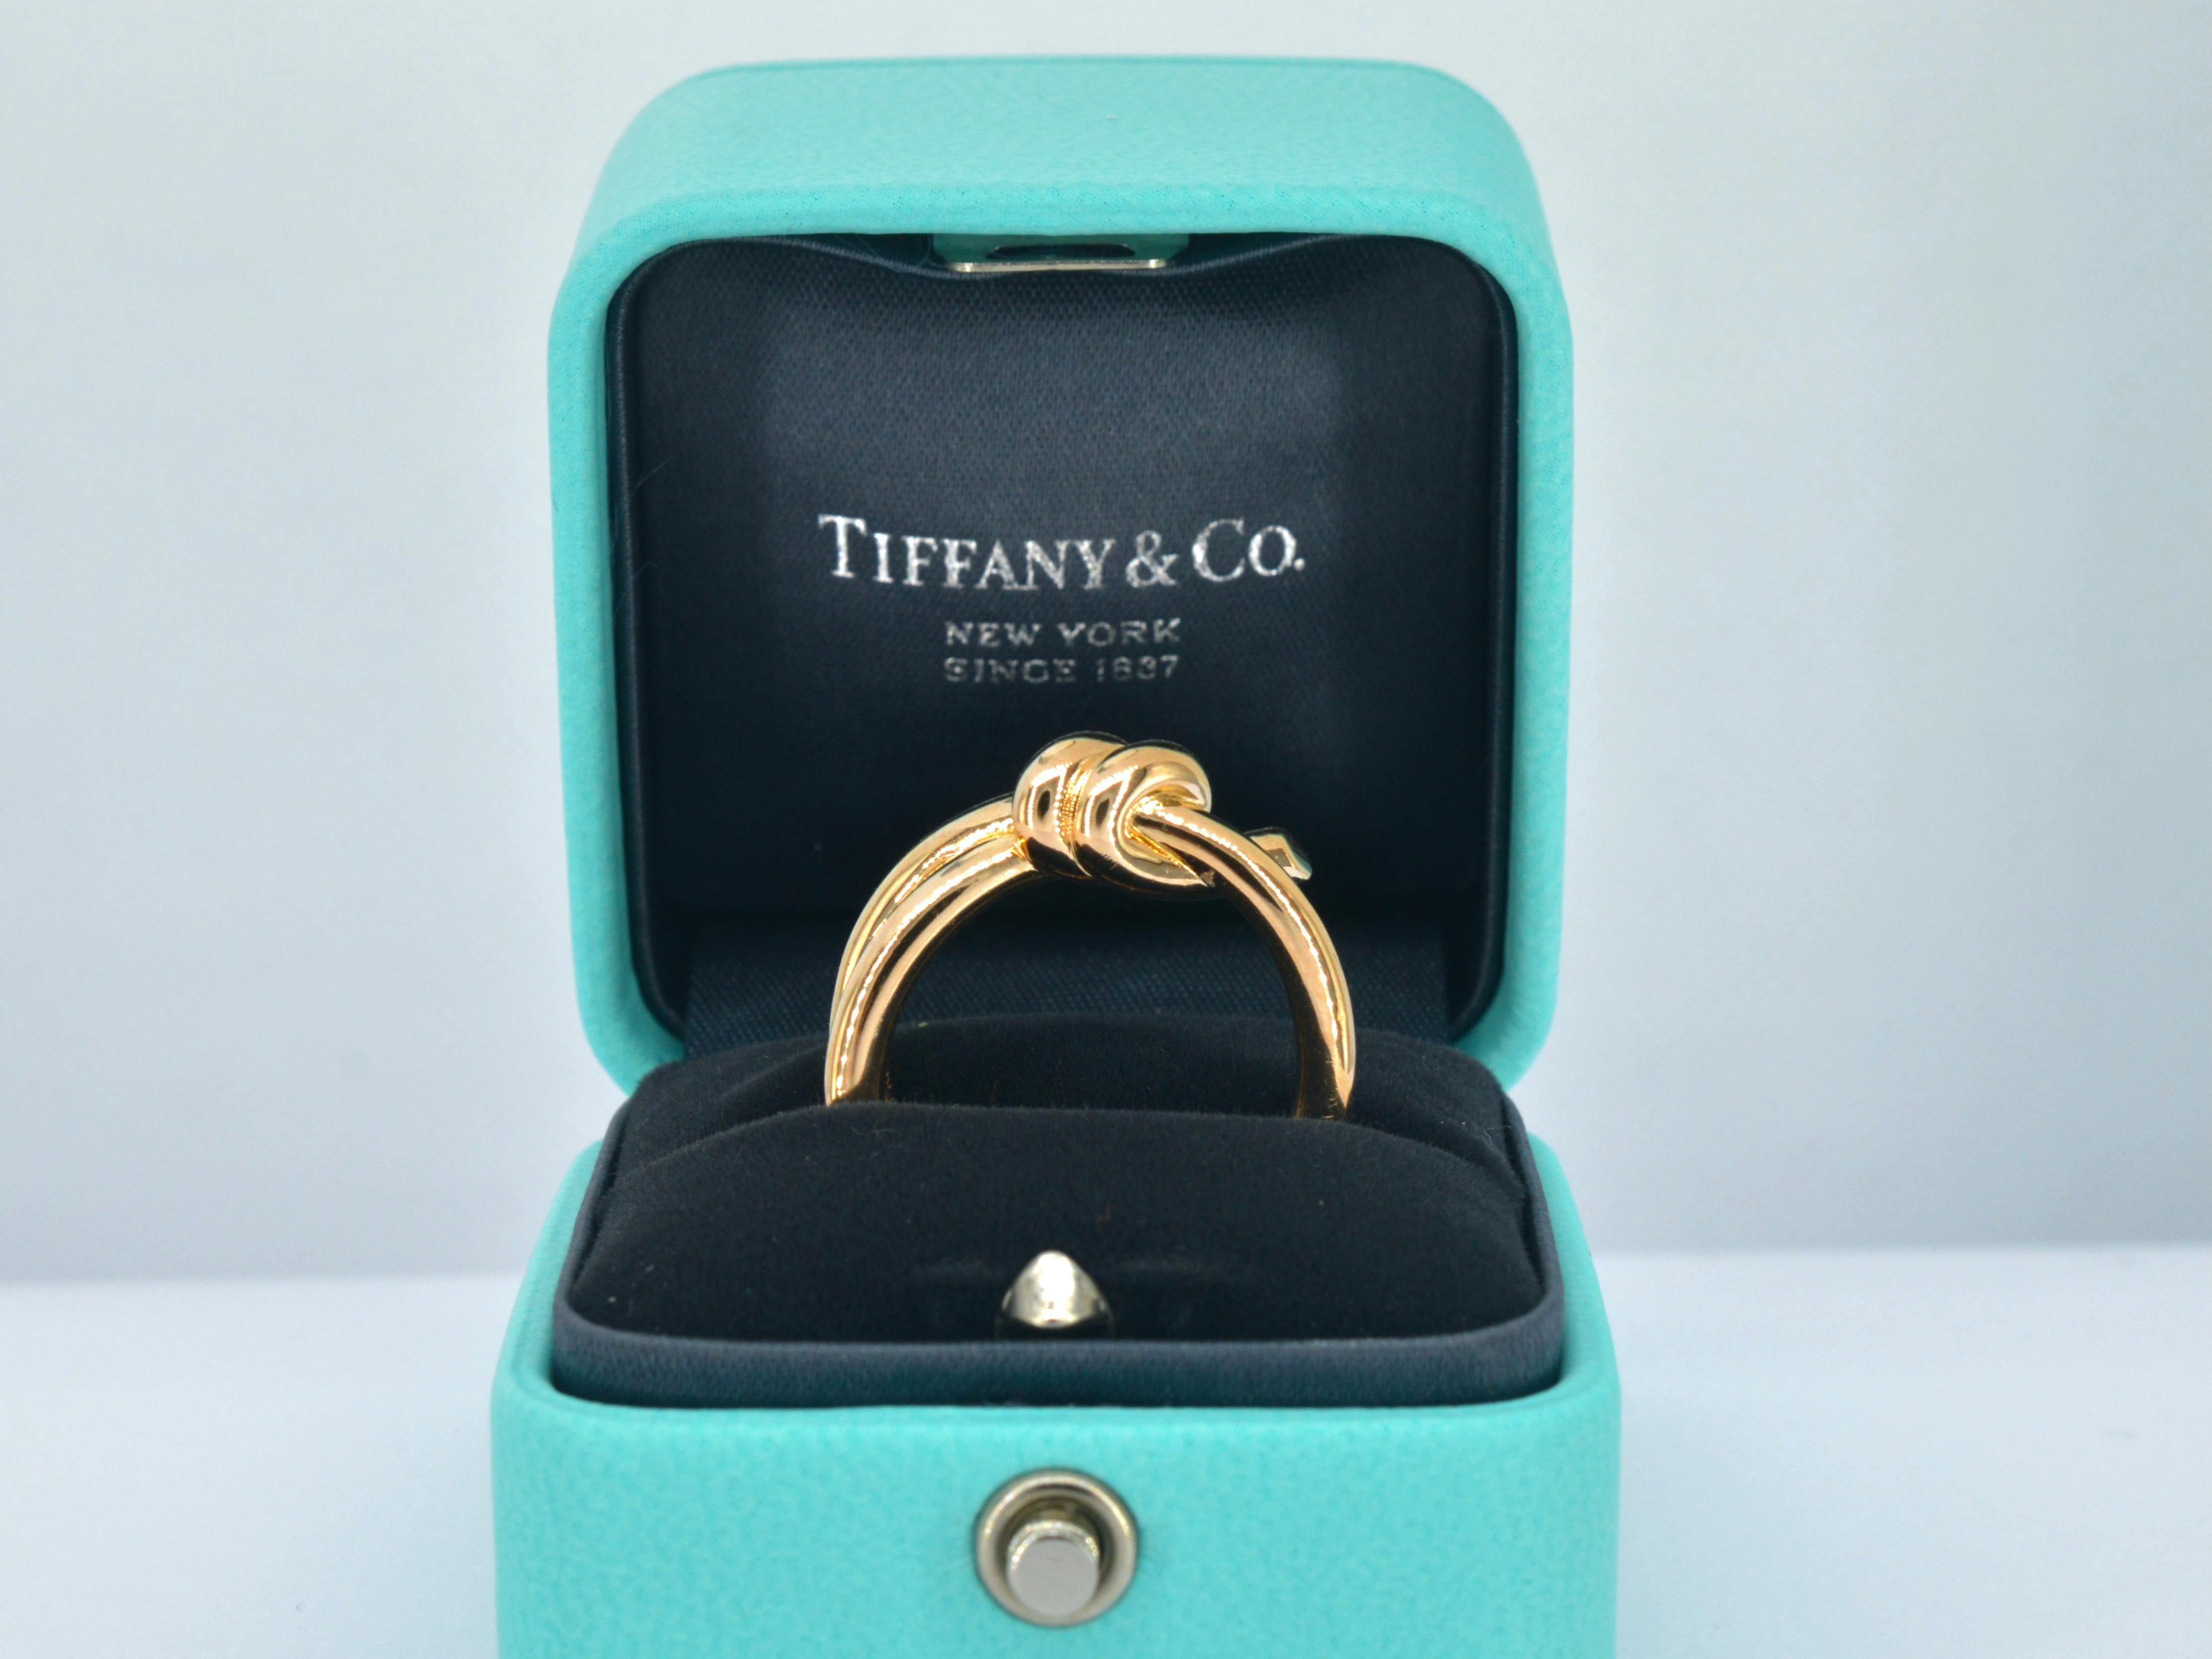 A symbol of elegance and style, this Tiffany & Co. Double Knot rose gold ring is a true masterpiece. Crafted from lustrous 18-karat gold 750, this exquisite ring weighs 11 grams and is custom-sized to a comfortable 56 - 17.75 mm. Its unique design,